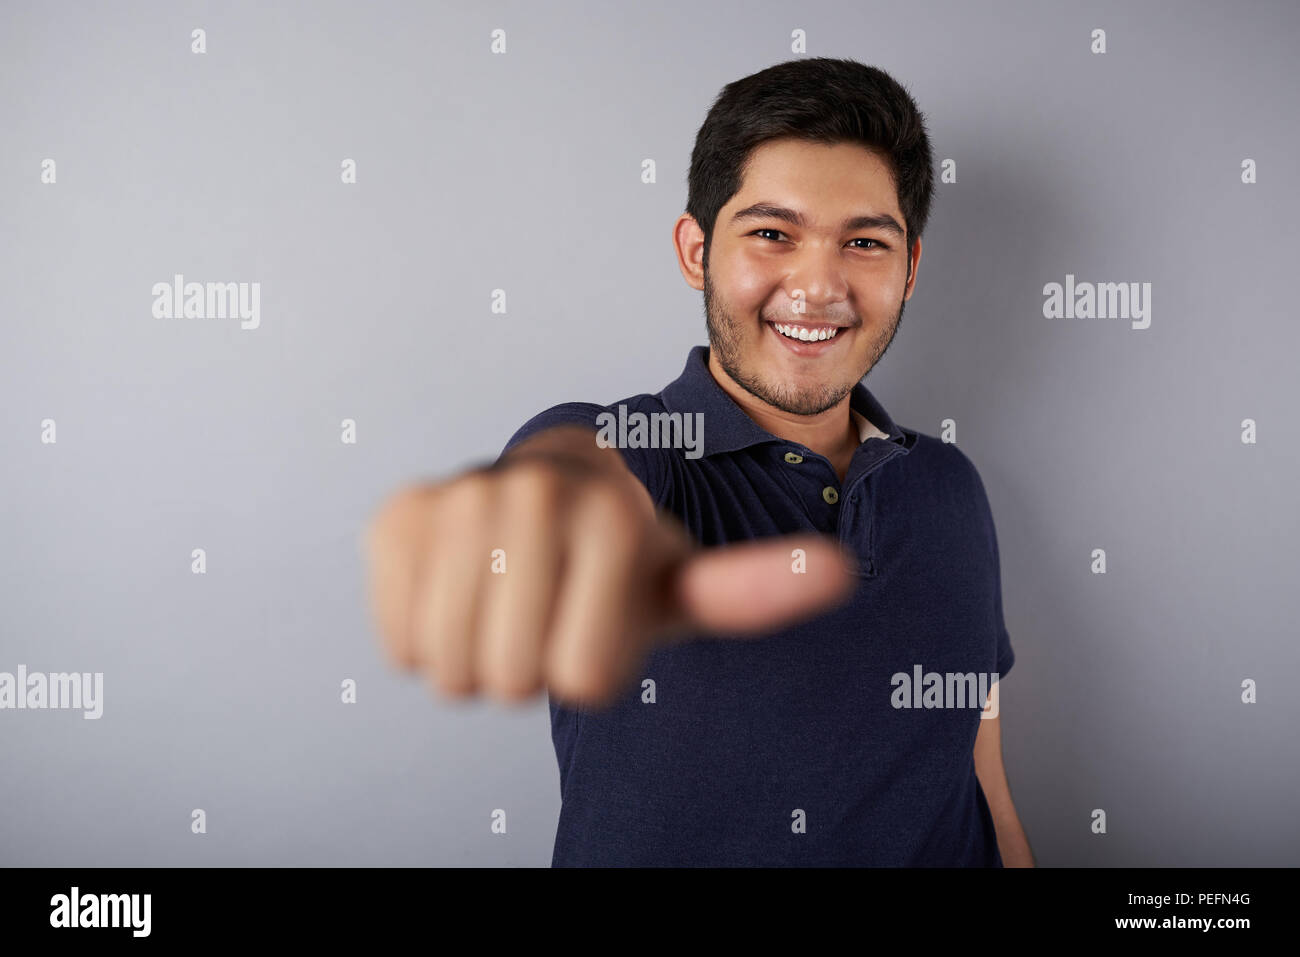 Smiling man showing thumb up into camera on gray background Stock Photo